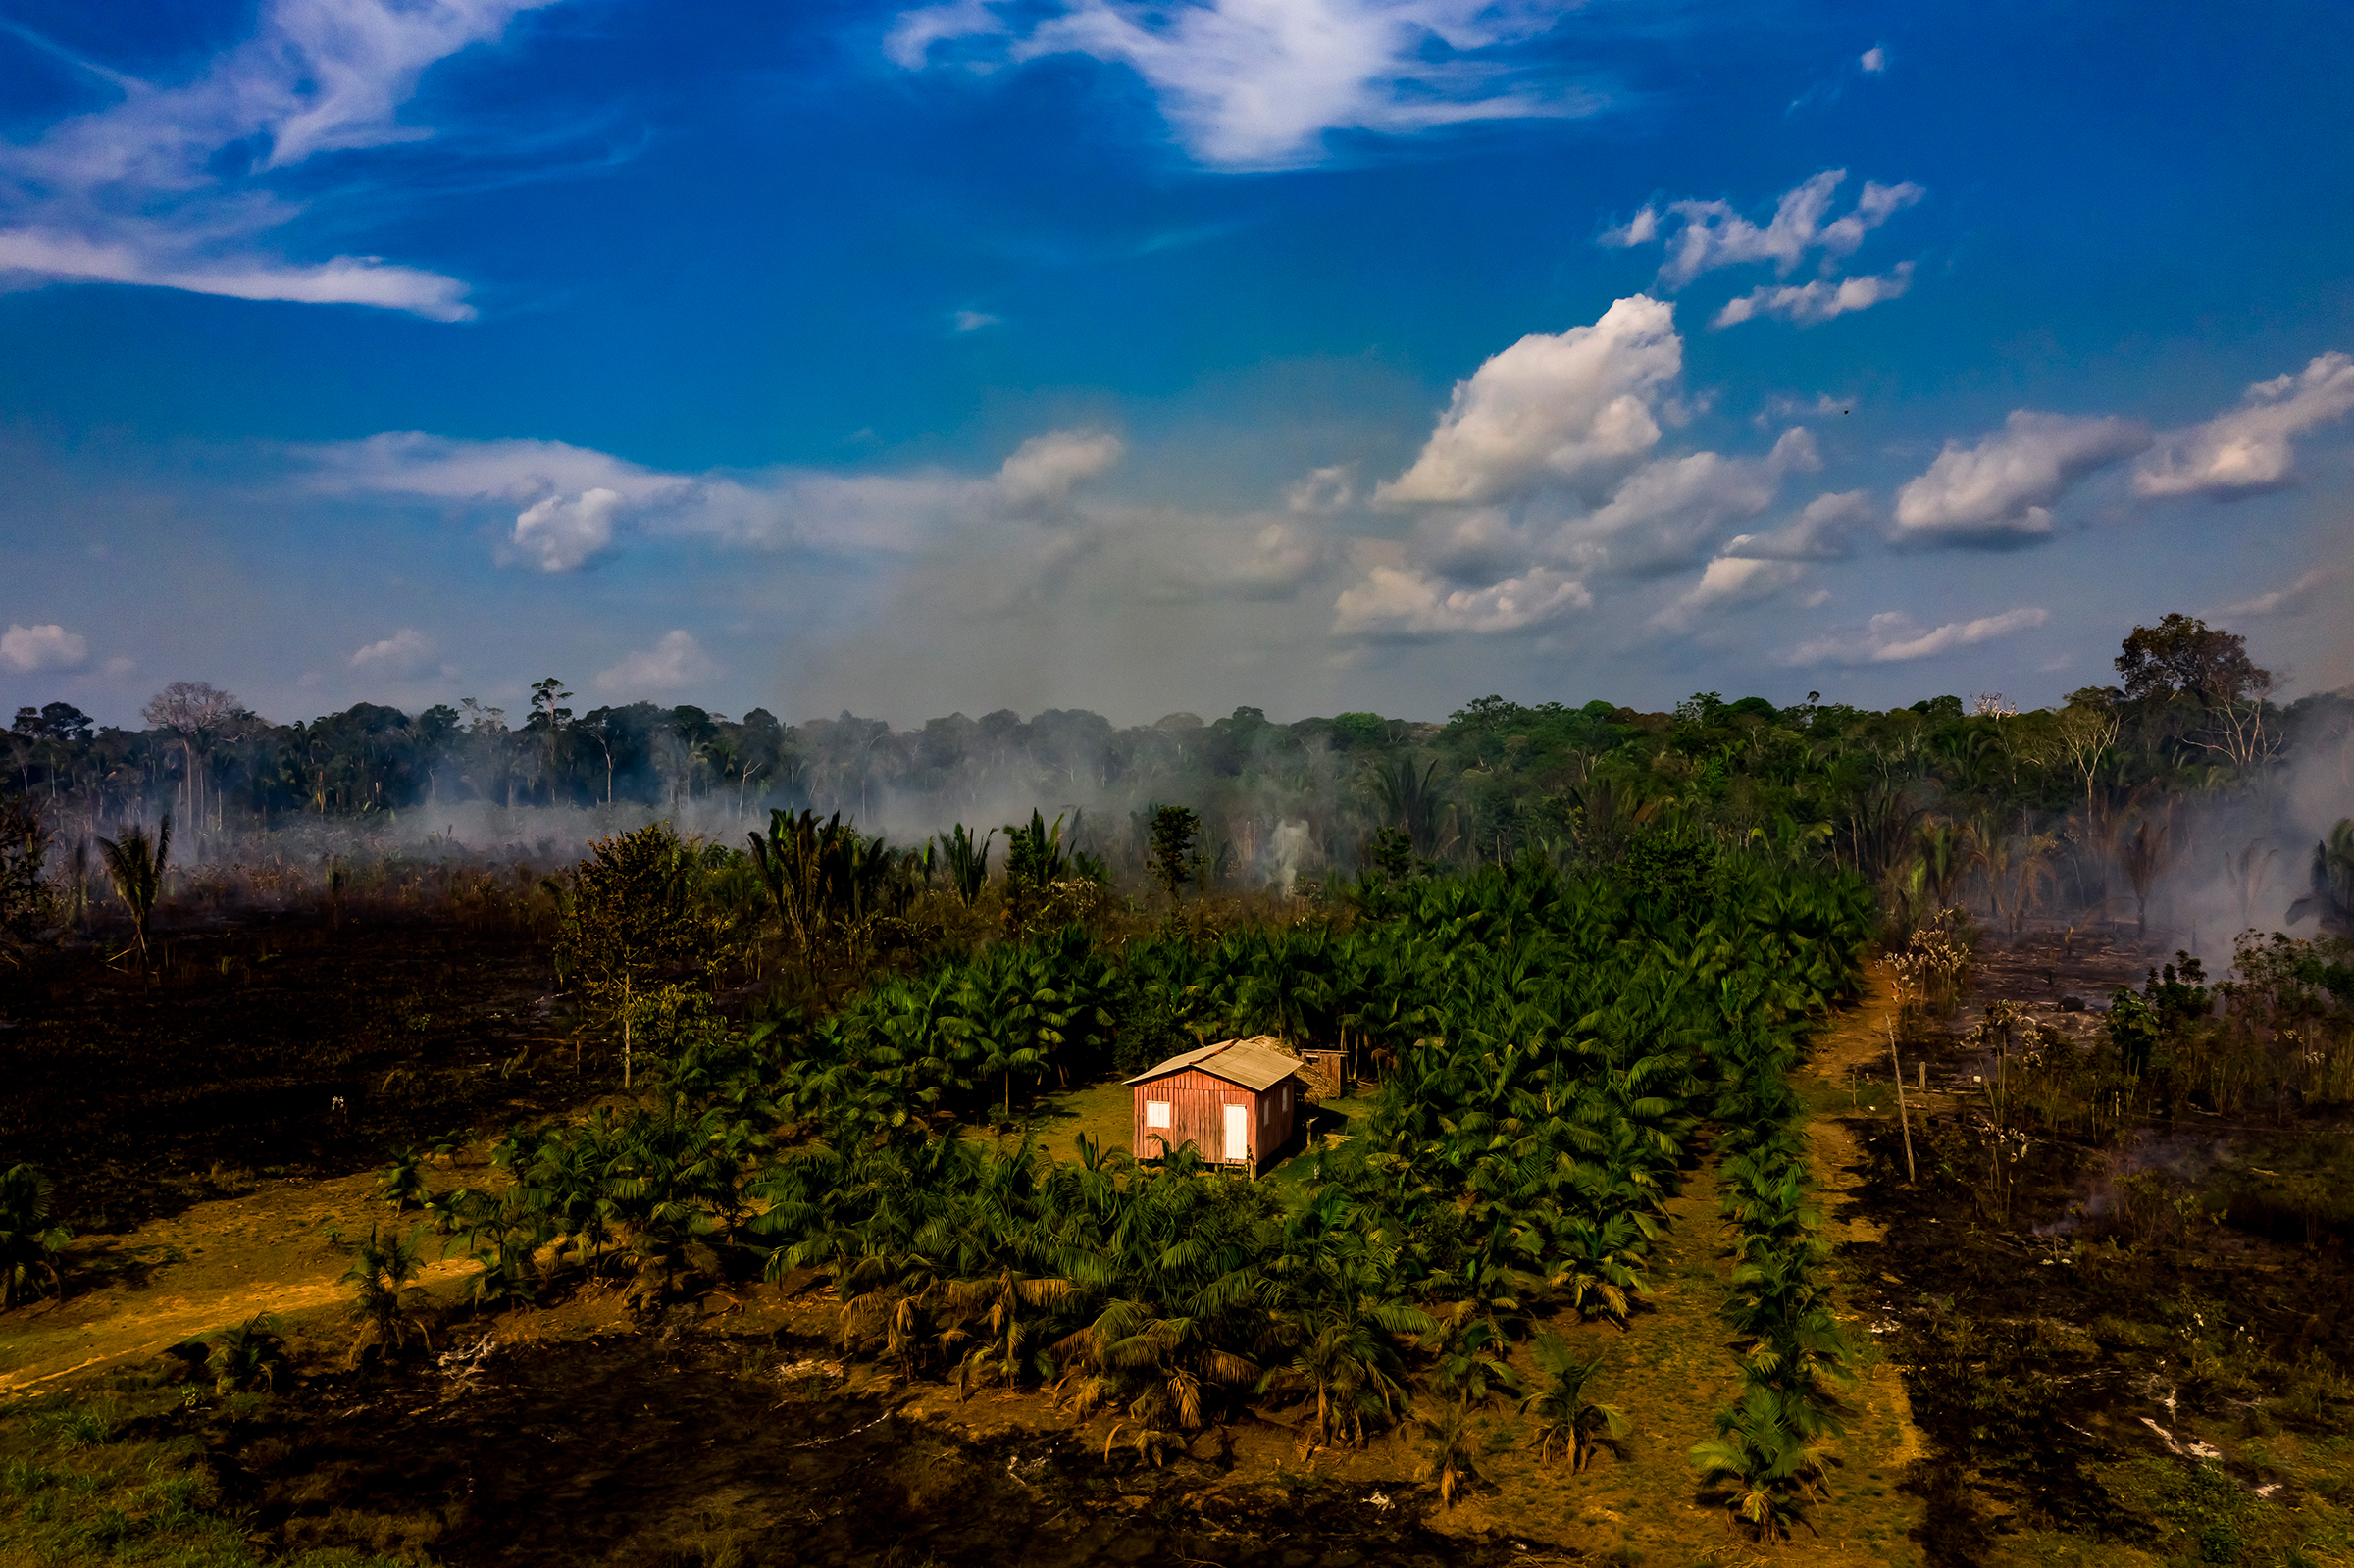 Smoke rises from a recent fire near Realidade on Aug. 26. (Sebastián Liste—NOOR for TIME)